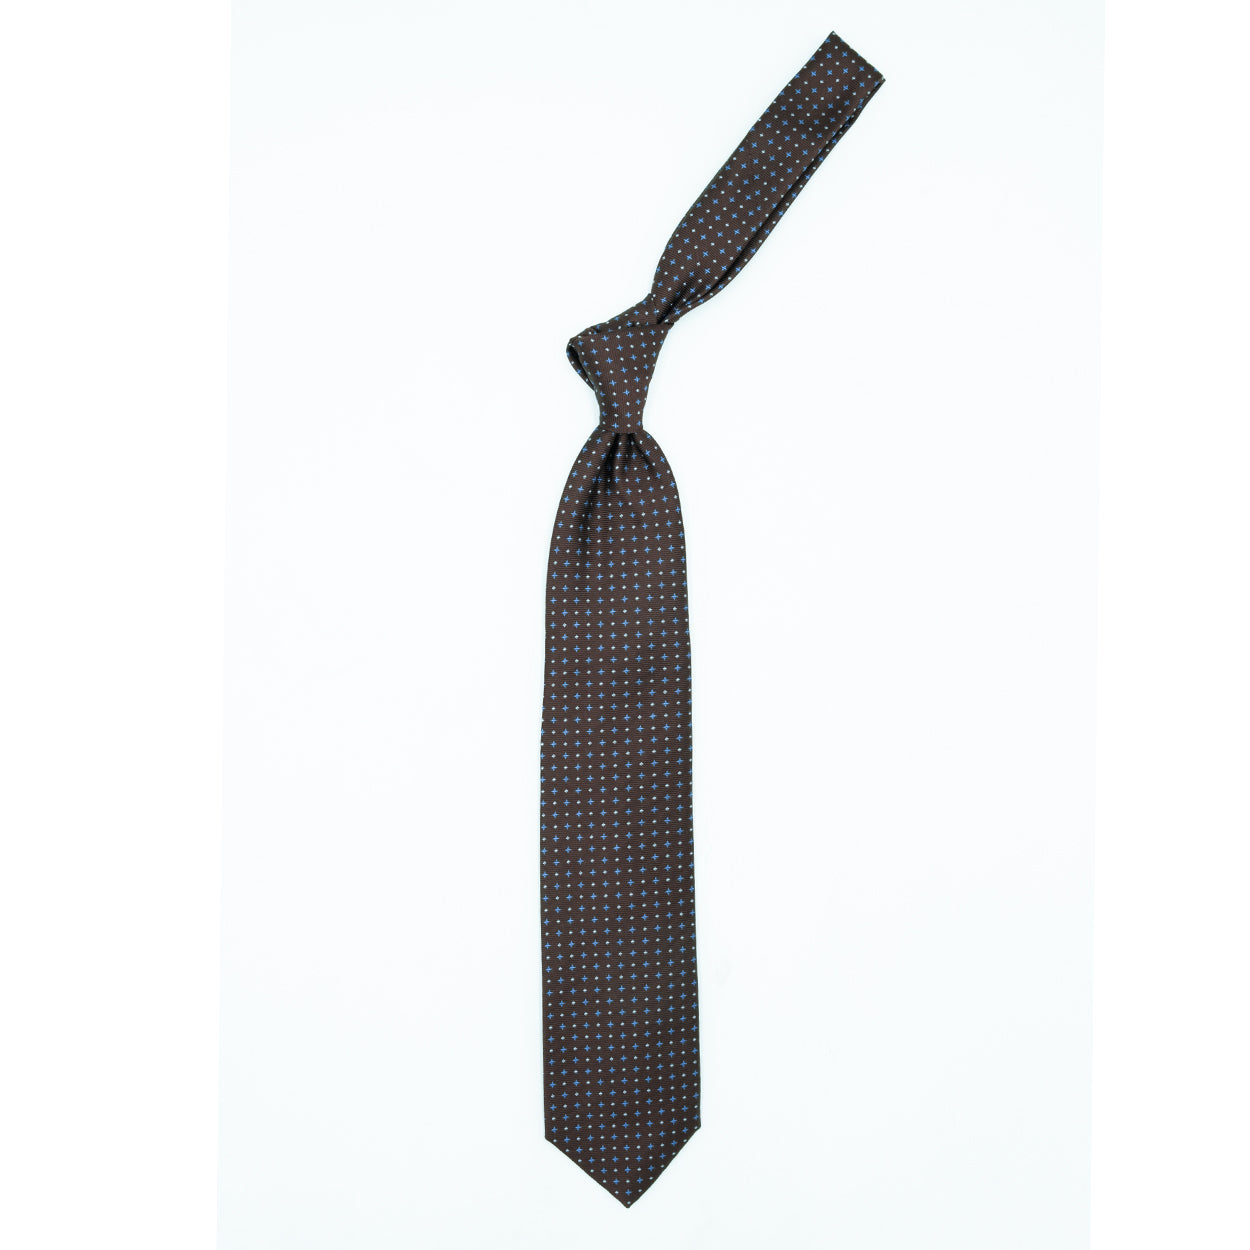 Brown tie with blue crosses and white dots